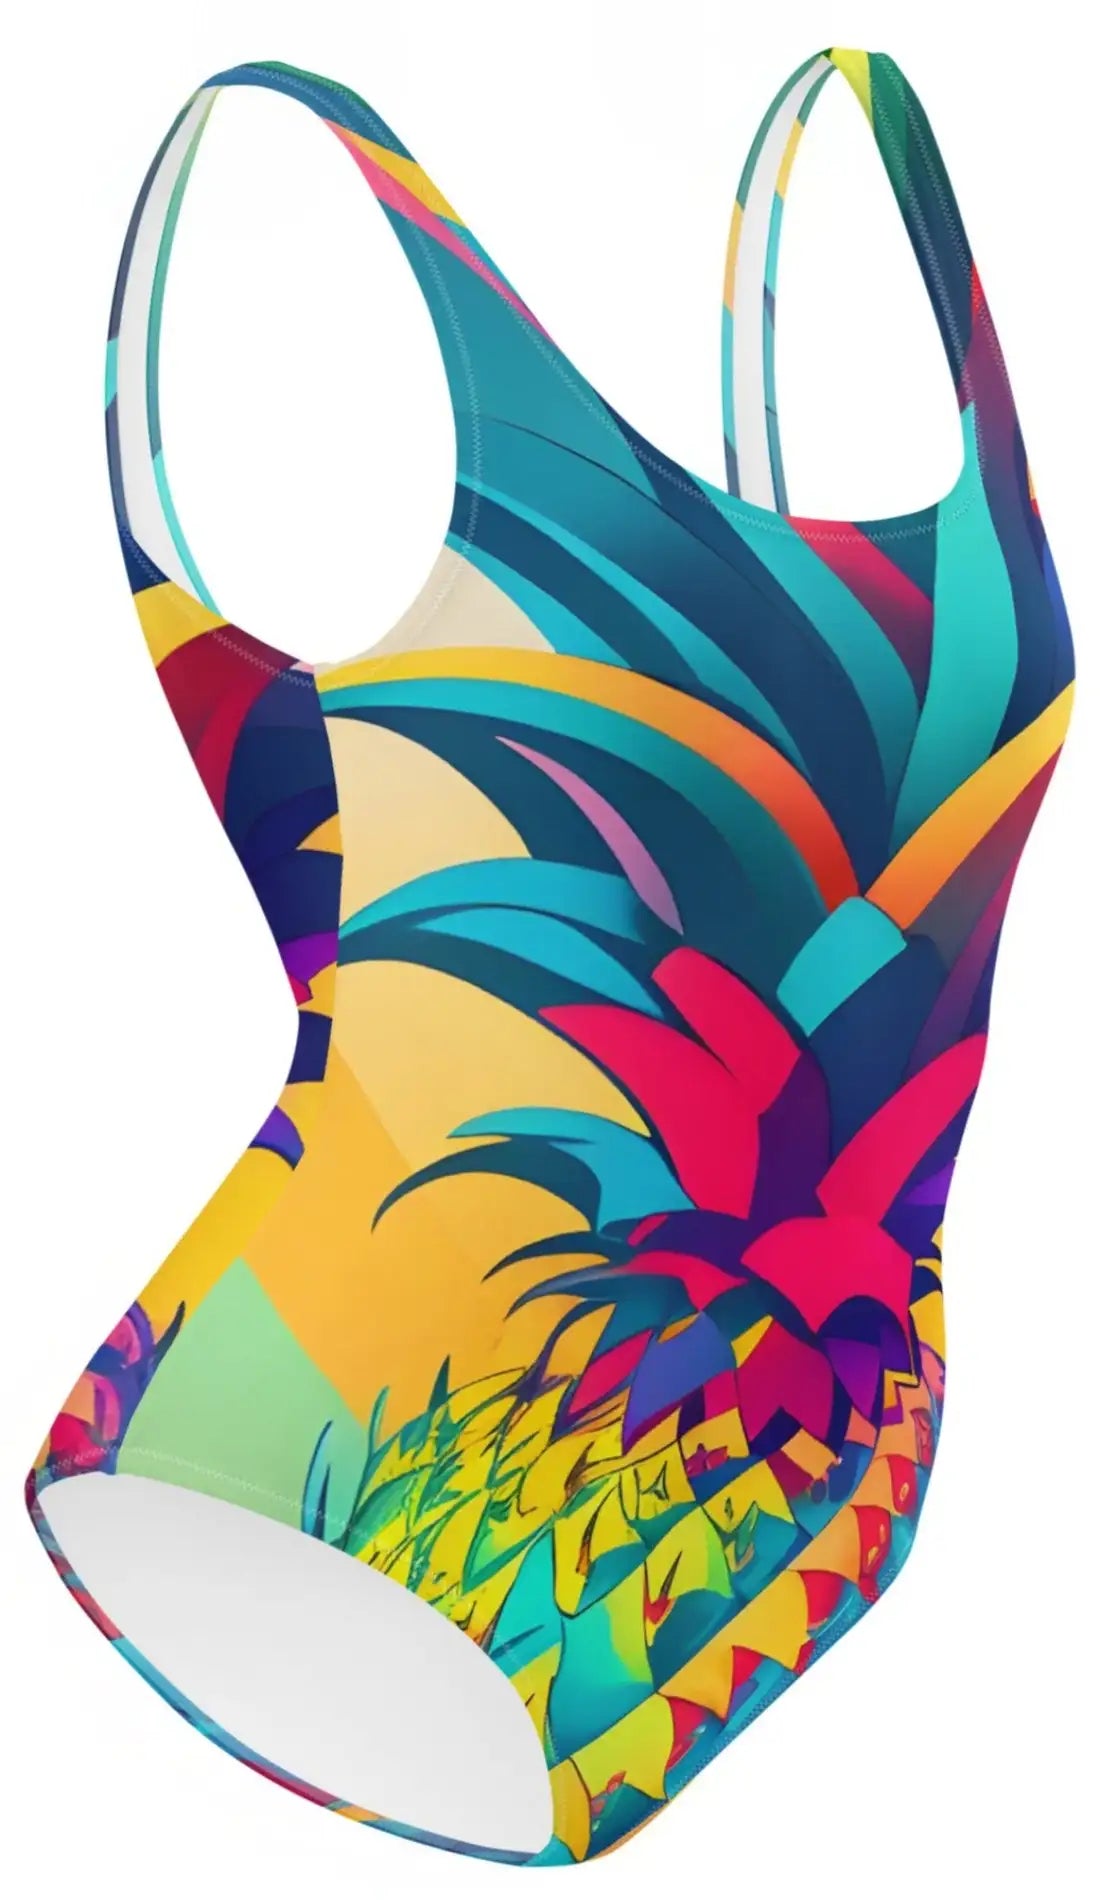 Geometric Pineapple: Vibrant Abstract One-Piece Swimsuit